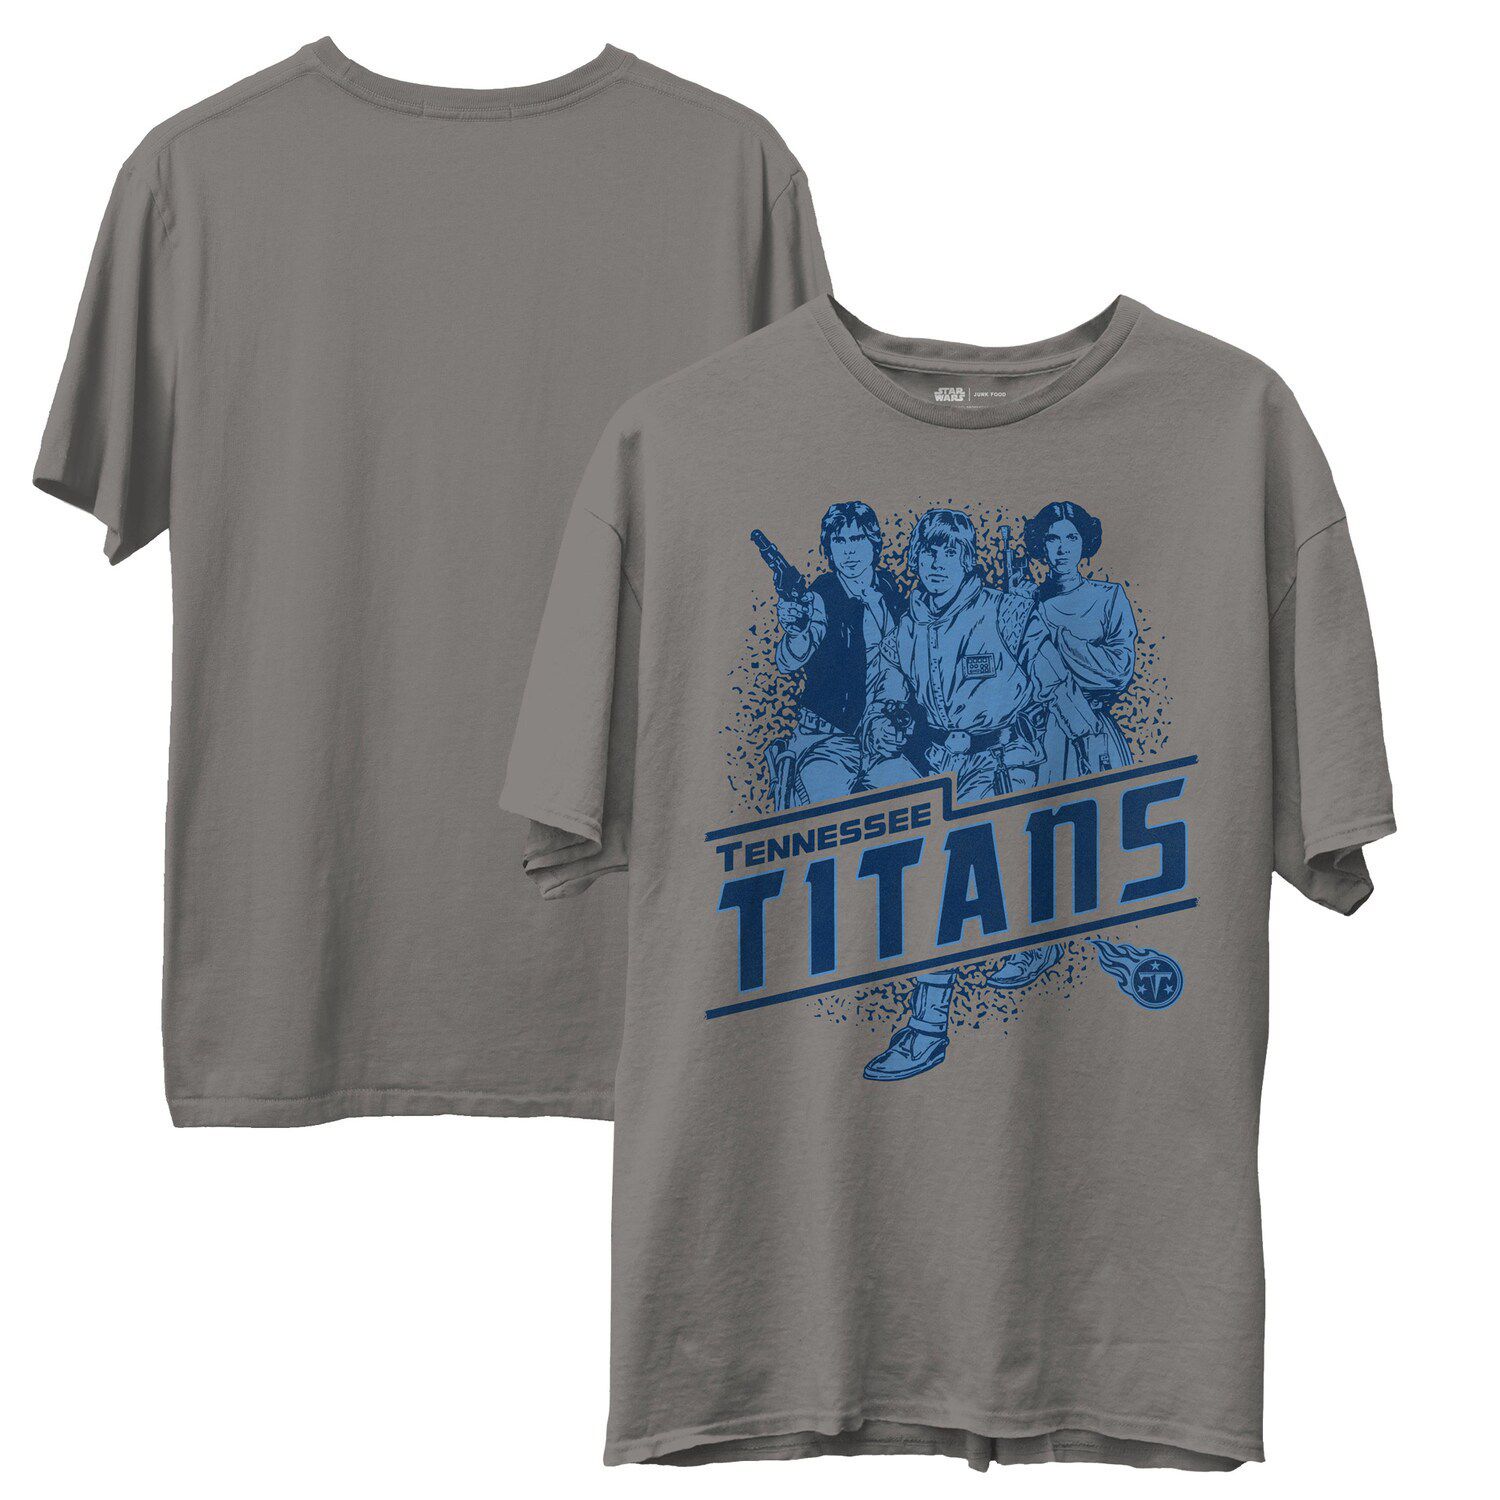 Image for Unbranded Men's Junk Food Heathered Gray Tennessee Titans Rebels Star Wars T-Shirt at Kohl's.